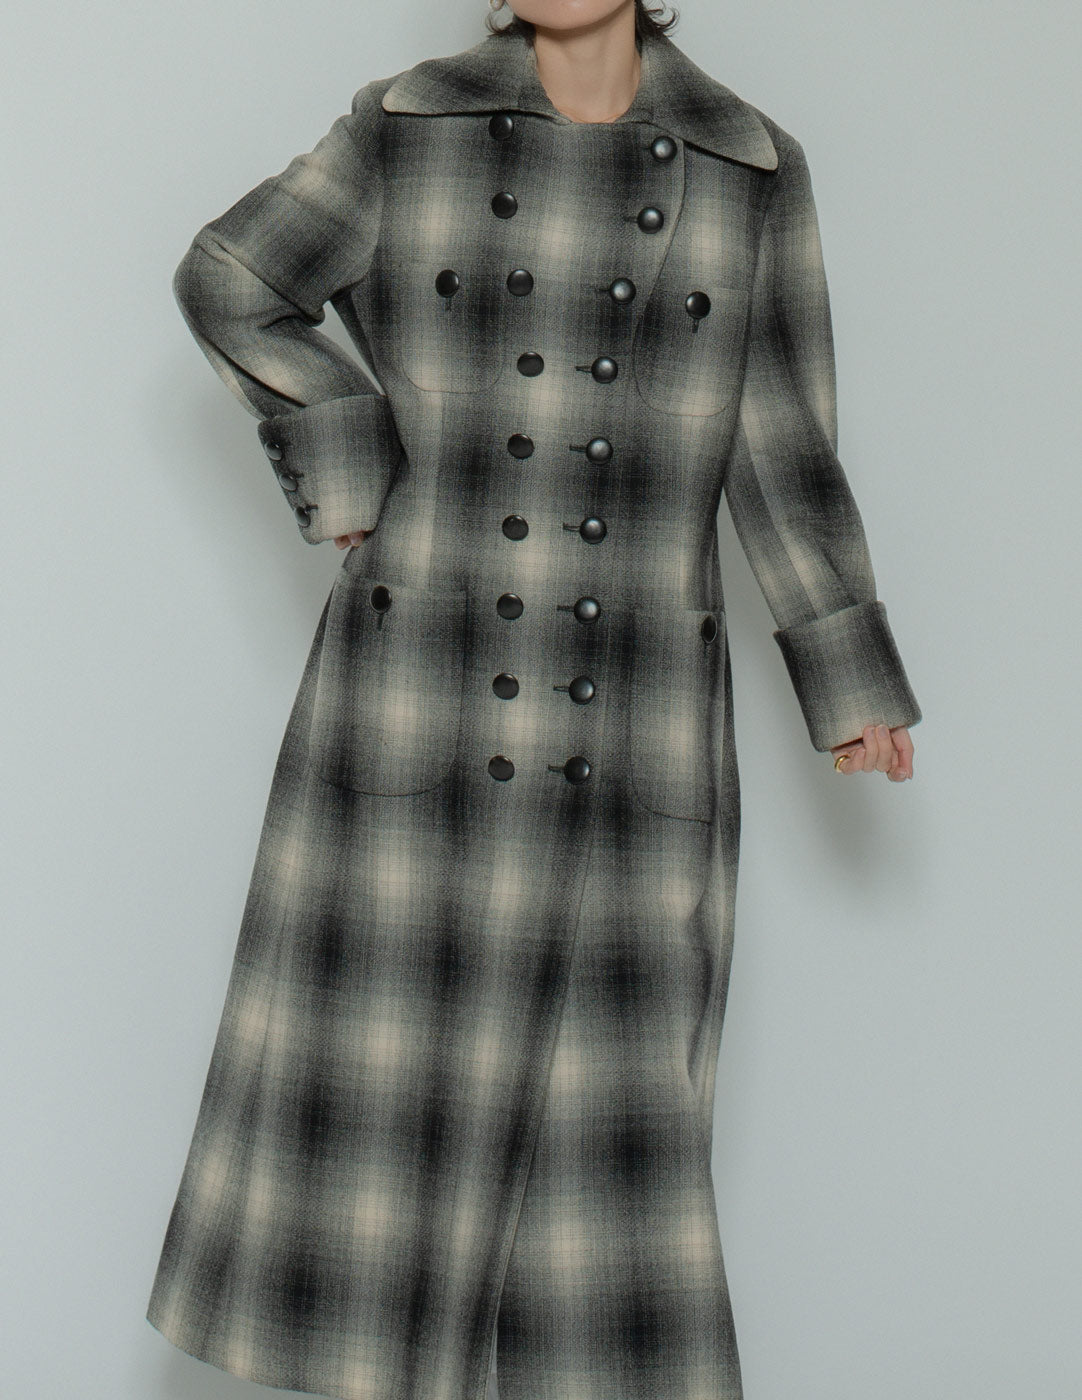 Moschino gradient plaid maxi wool coat front detail